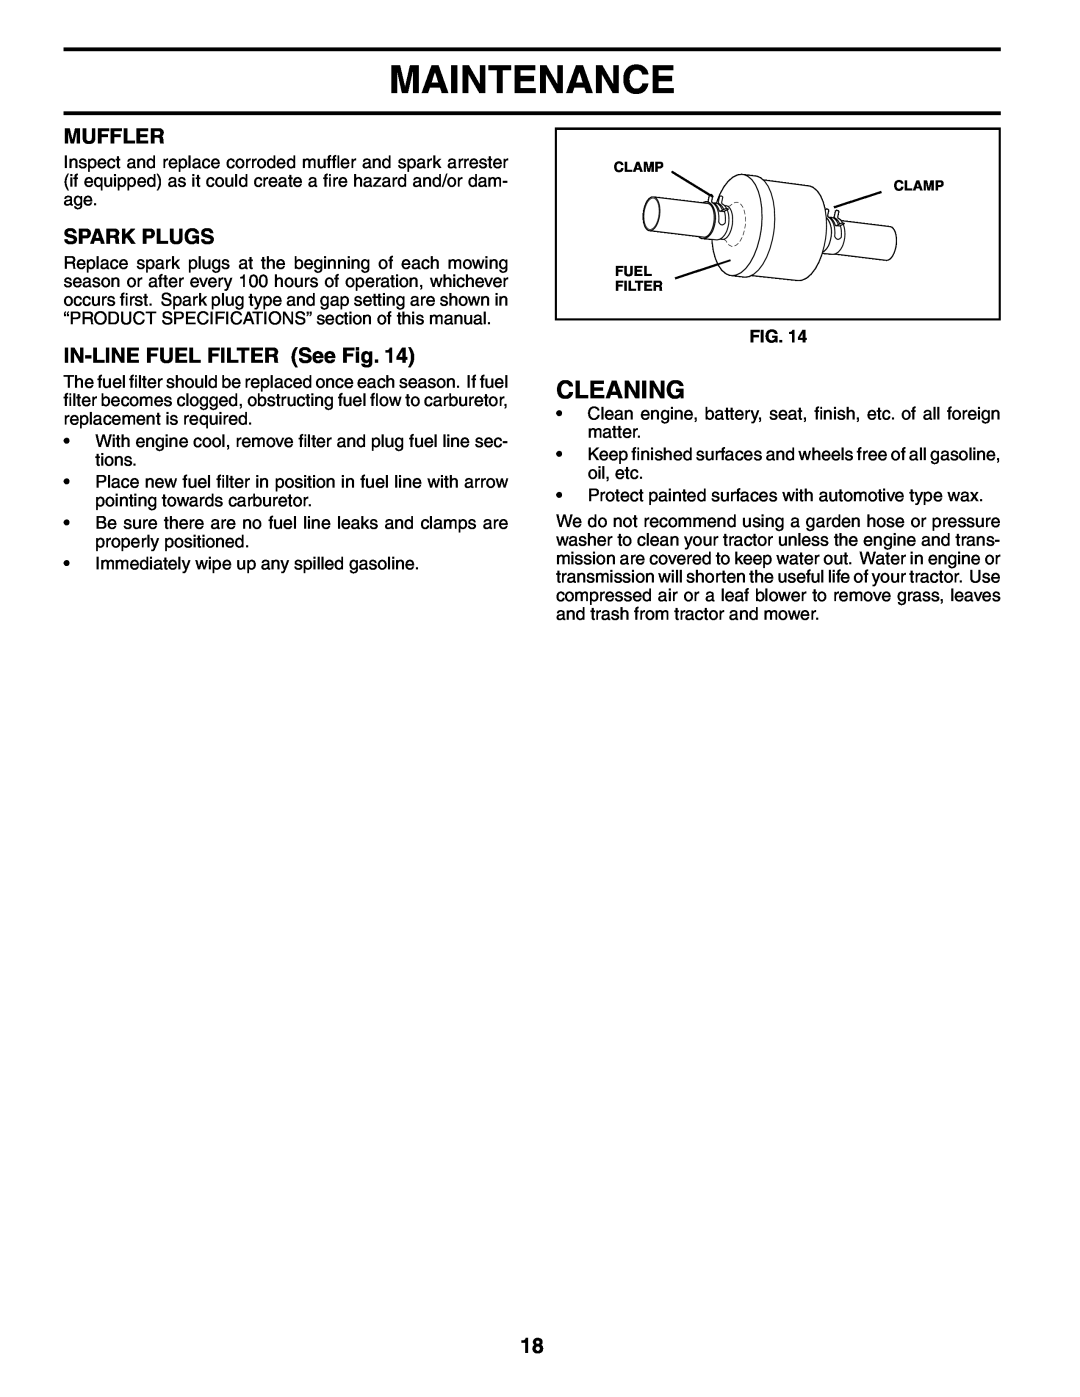 Weed Eater WE1338A, 184404 manual Cleaning, Muffler, Spark Plugs, IN-LINE FUEL FILTER See Fig, Maintenance 